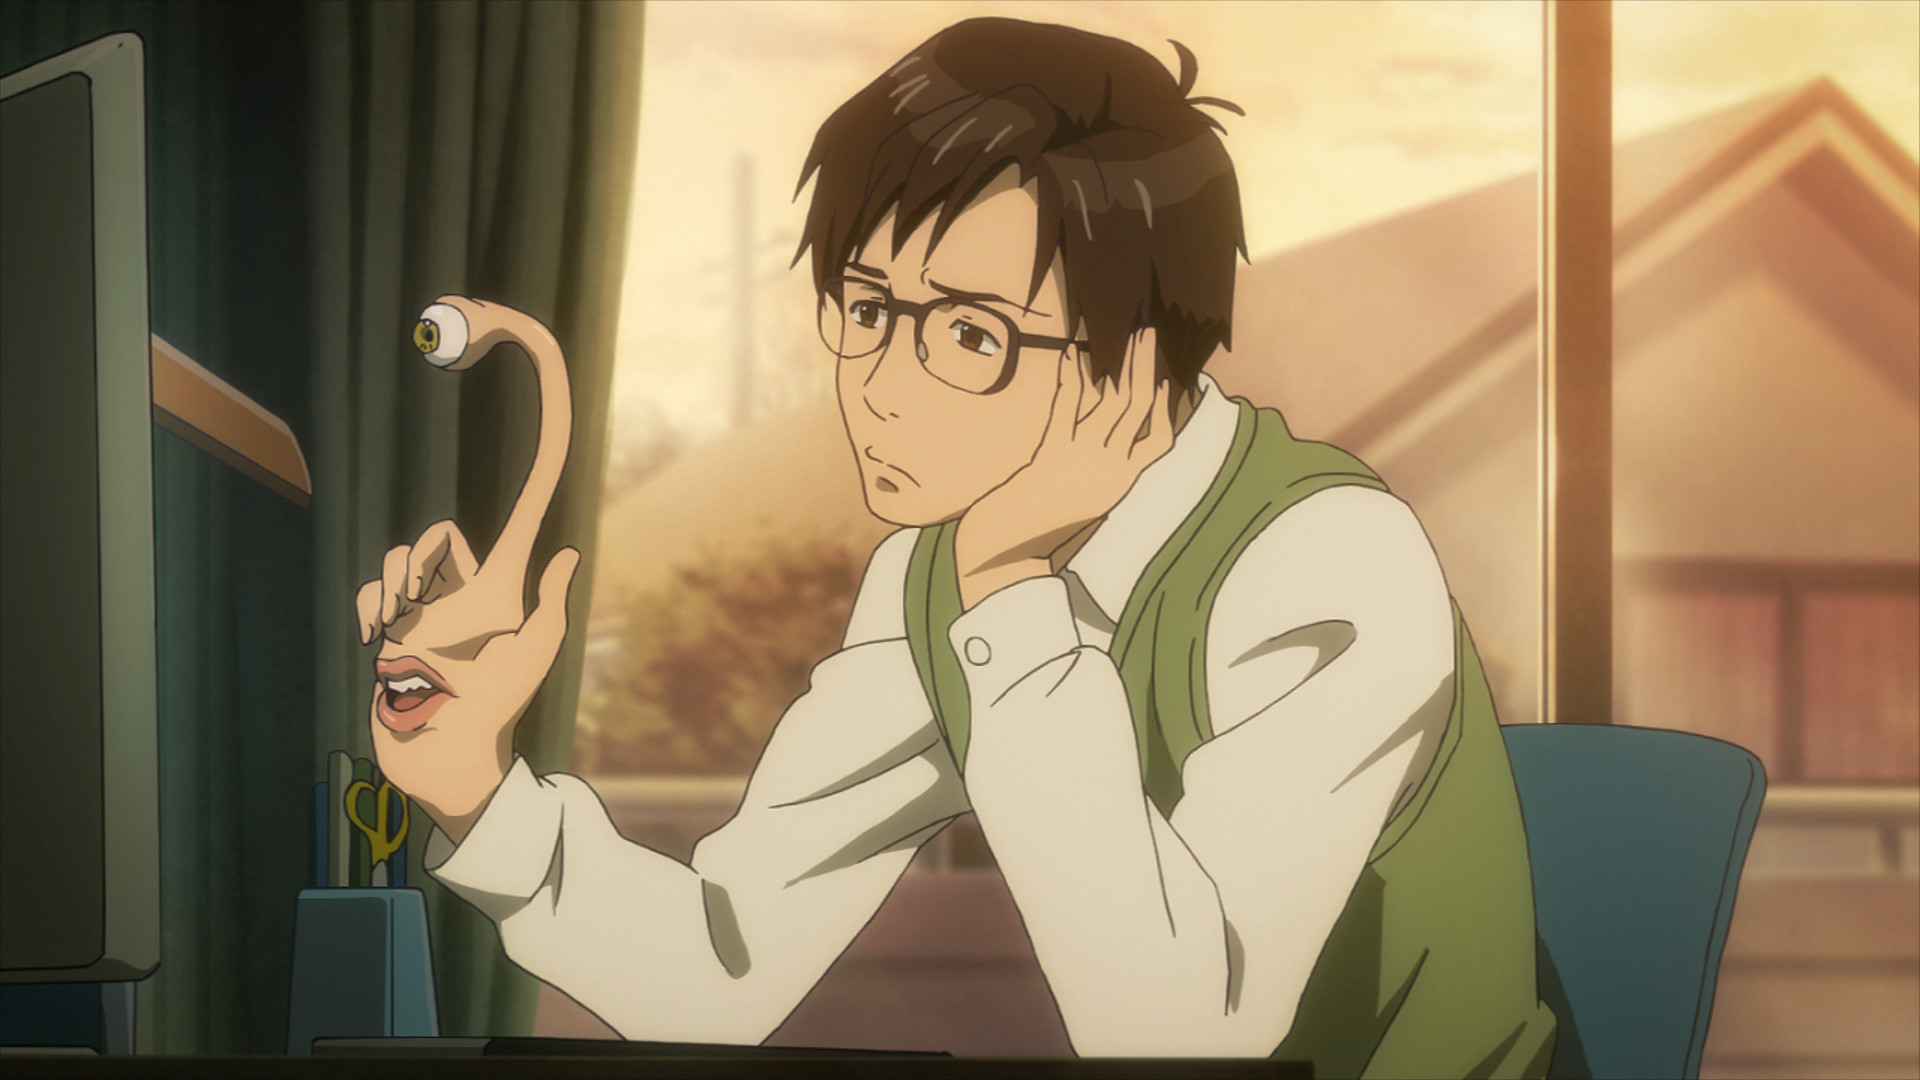 1920x1080 Five Things You Probably Didn't Know About Parasyte